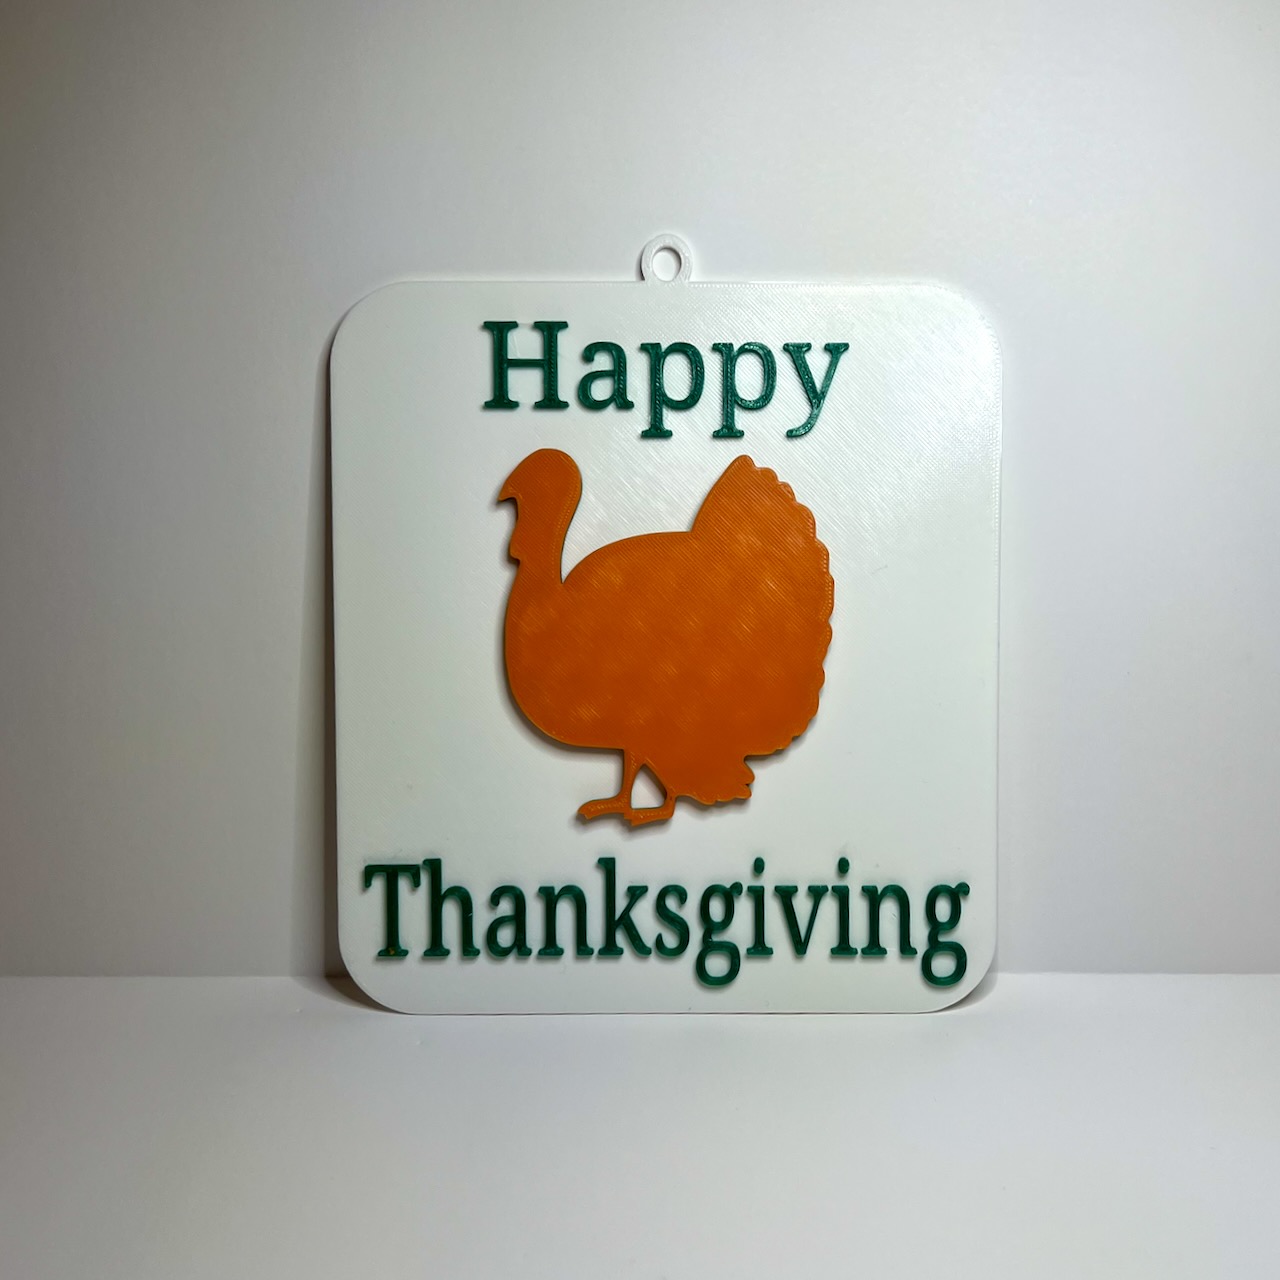 Happy Thanksgiving sign